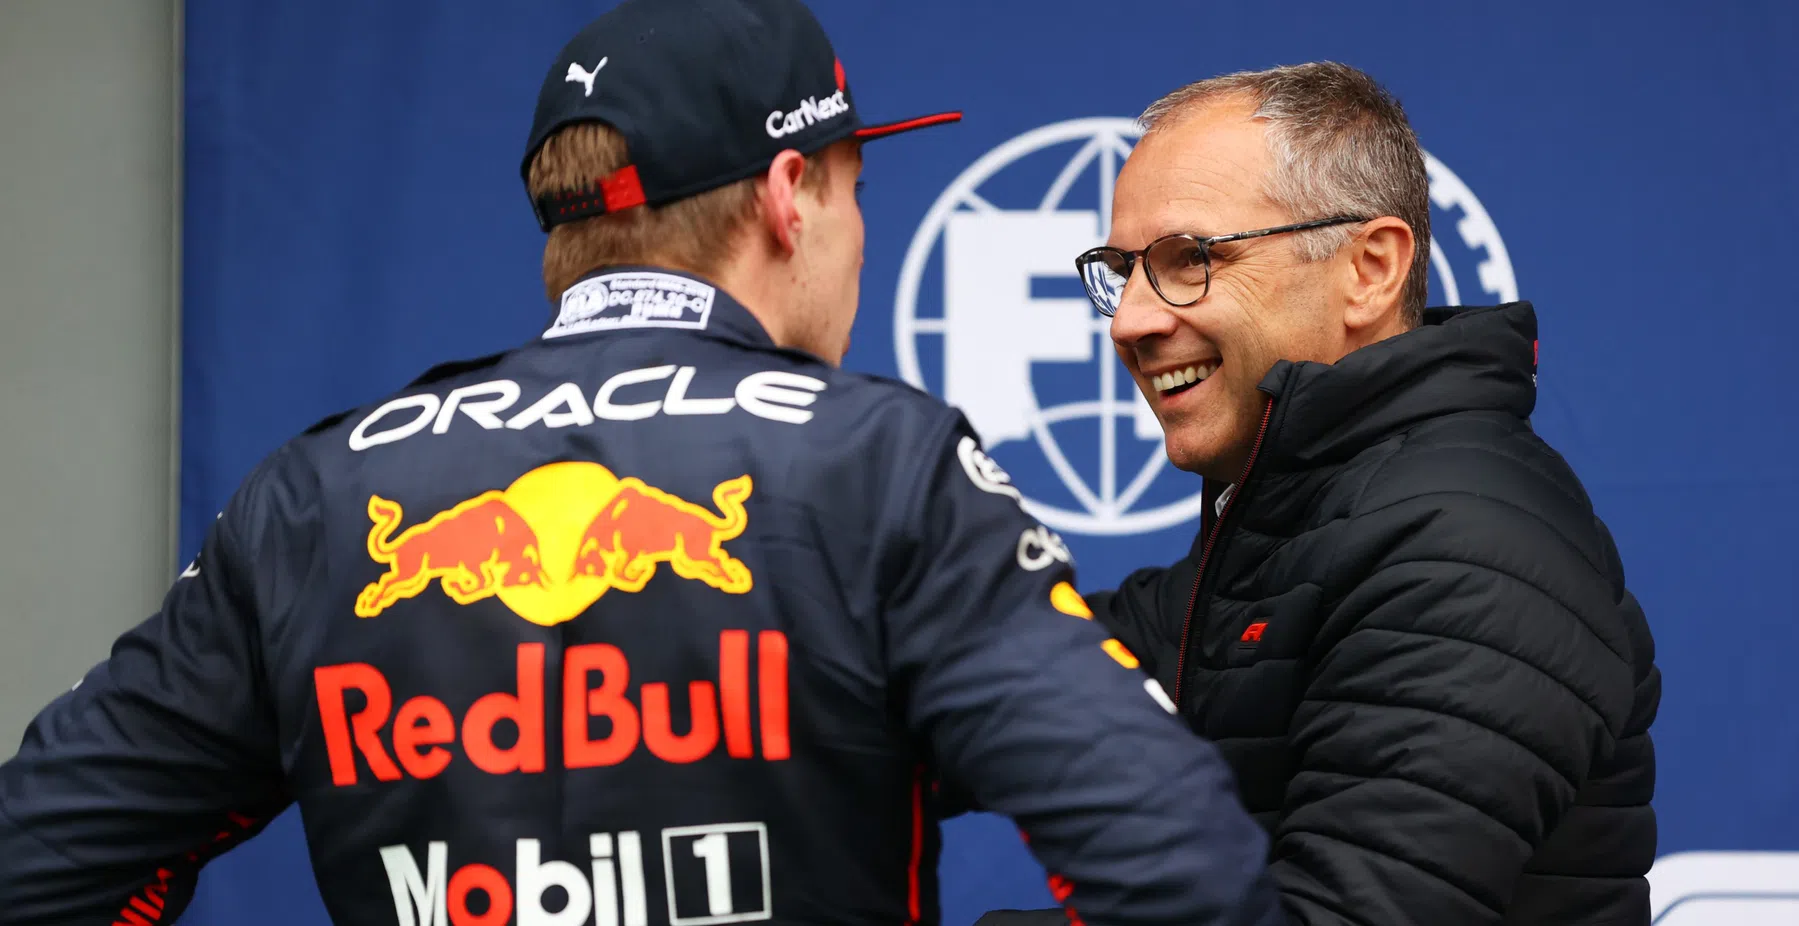 Domenicali defends Red Bull after criticism